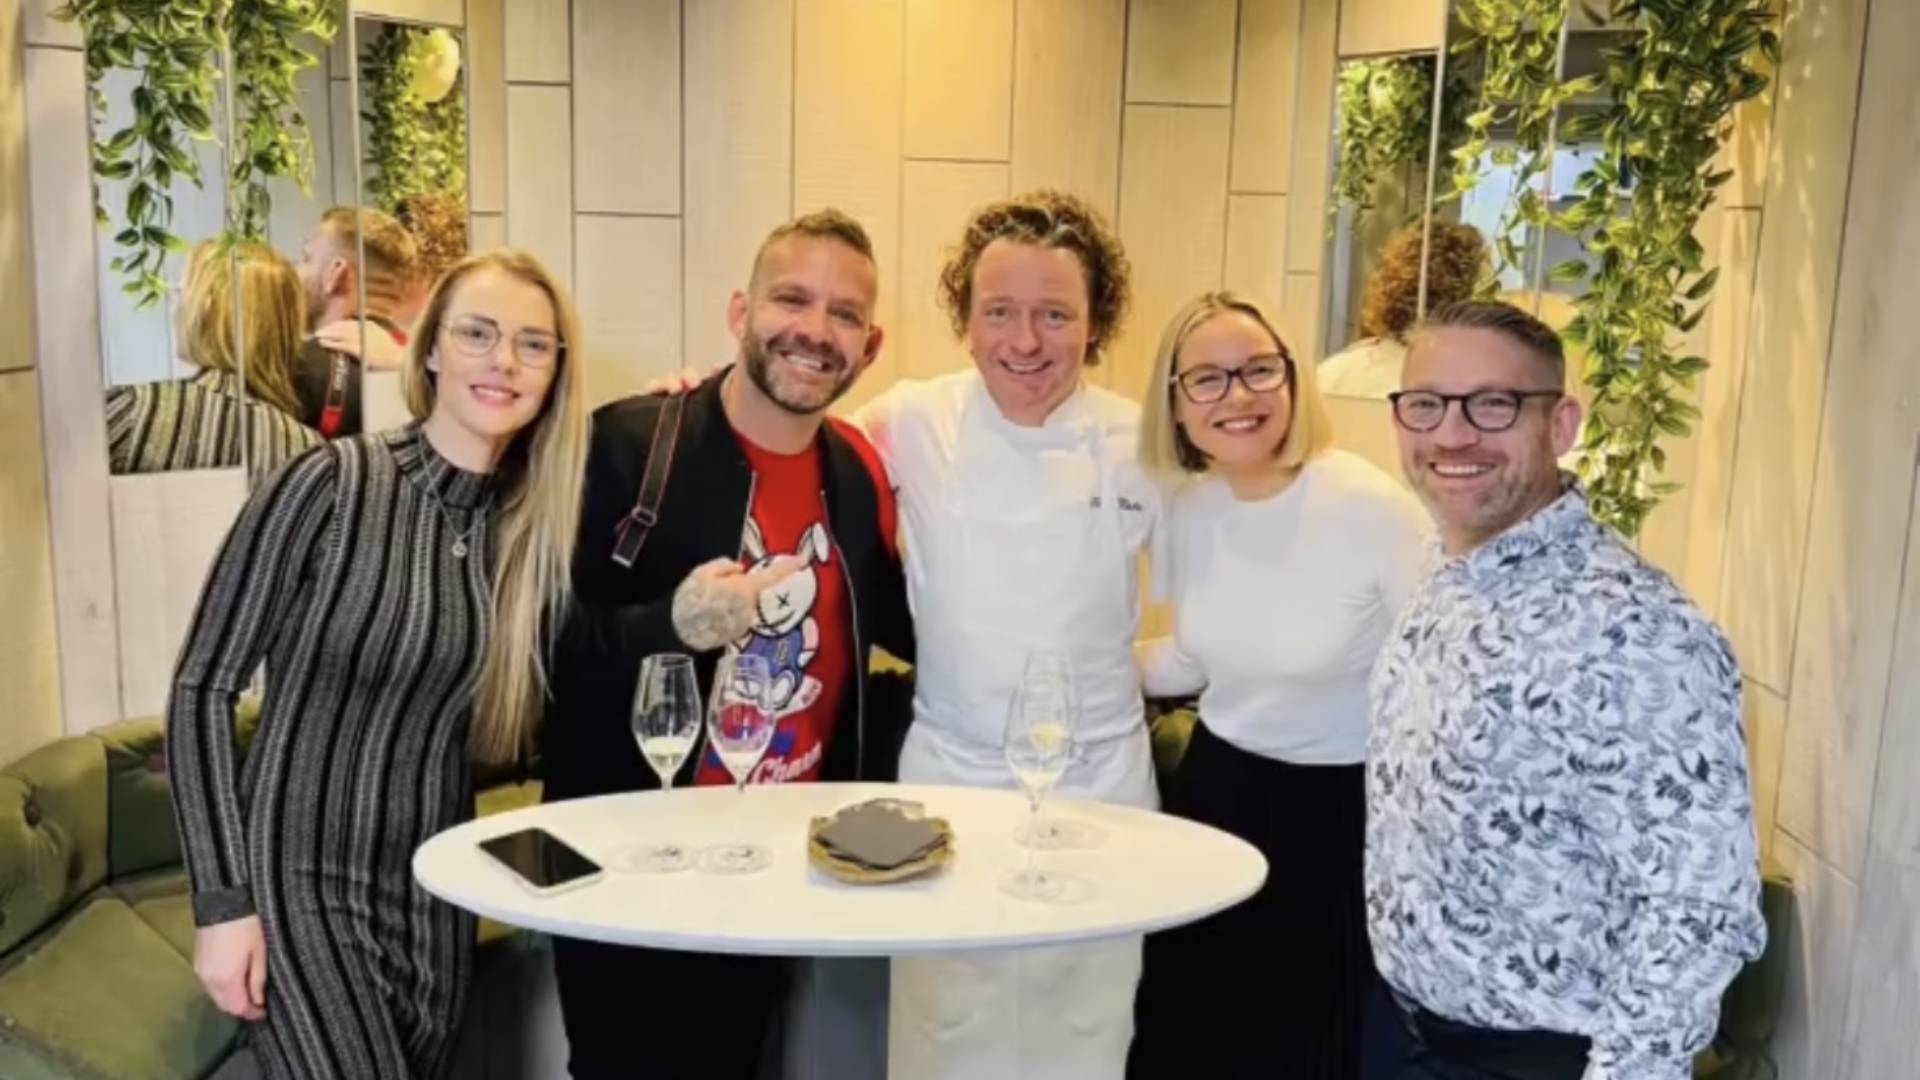 Callum Richardson, founder of Forked Up, The Bay Fish and Chips and Chef's Table and Viktorjia with Tom Kitchin